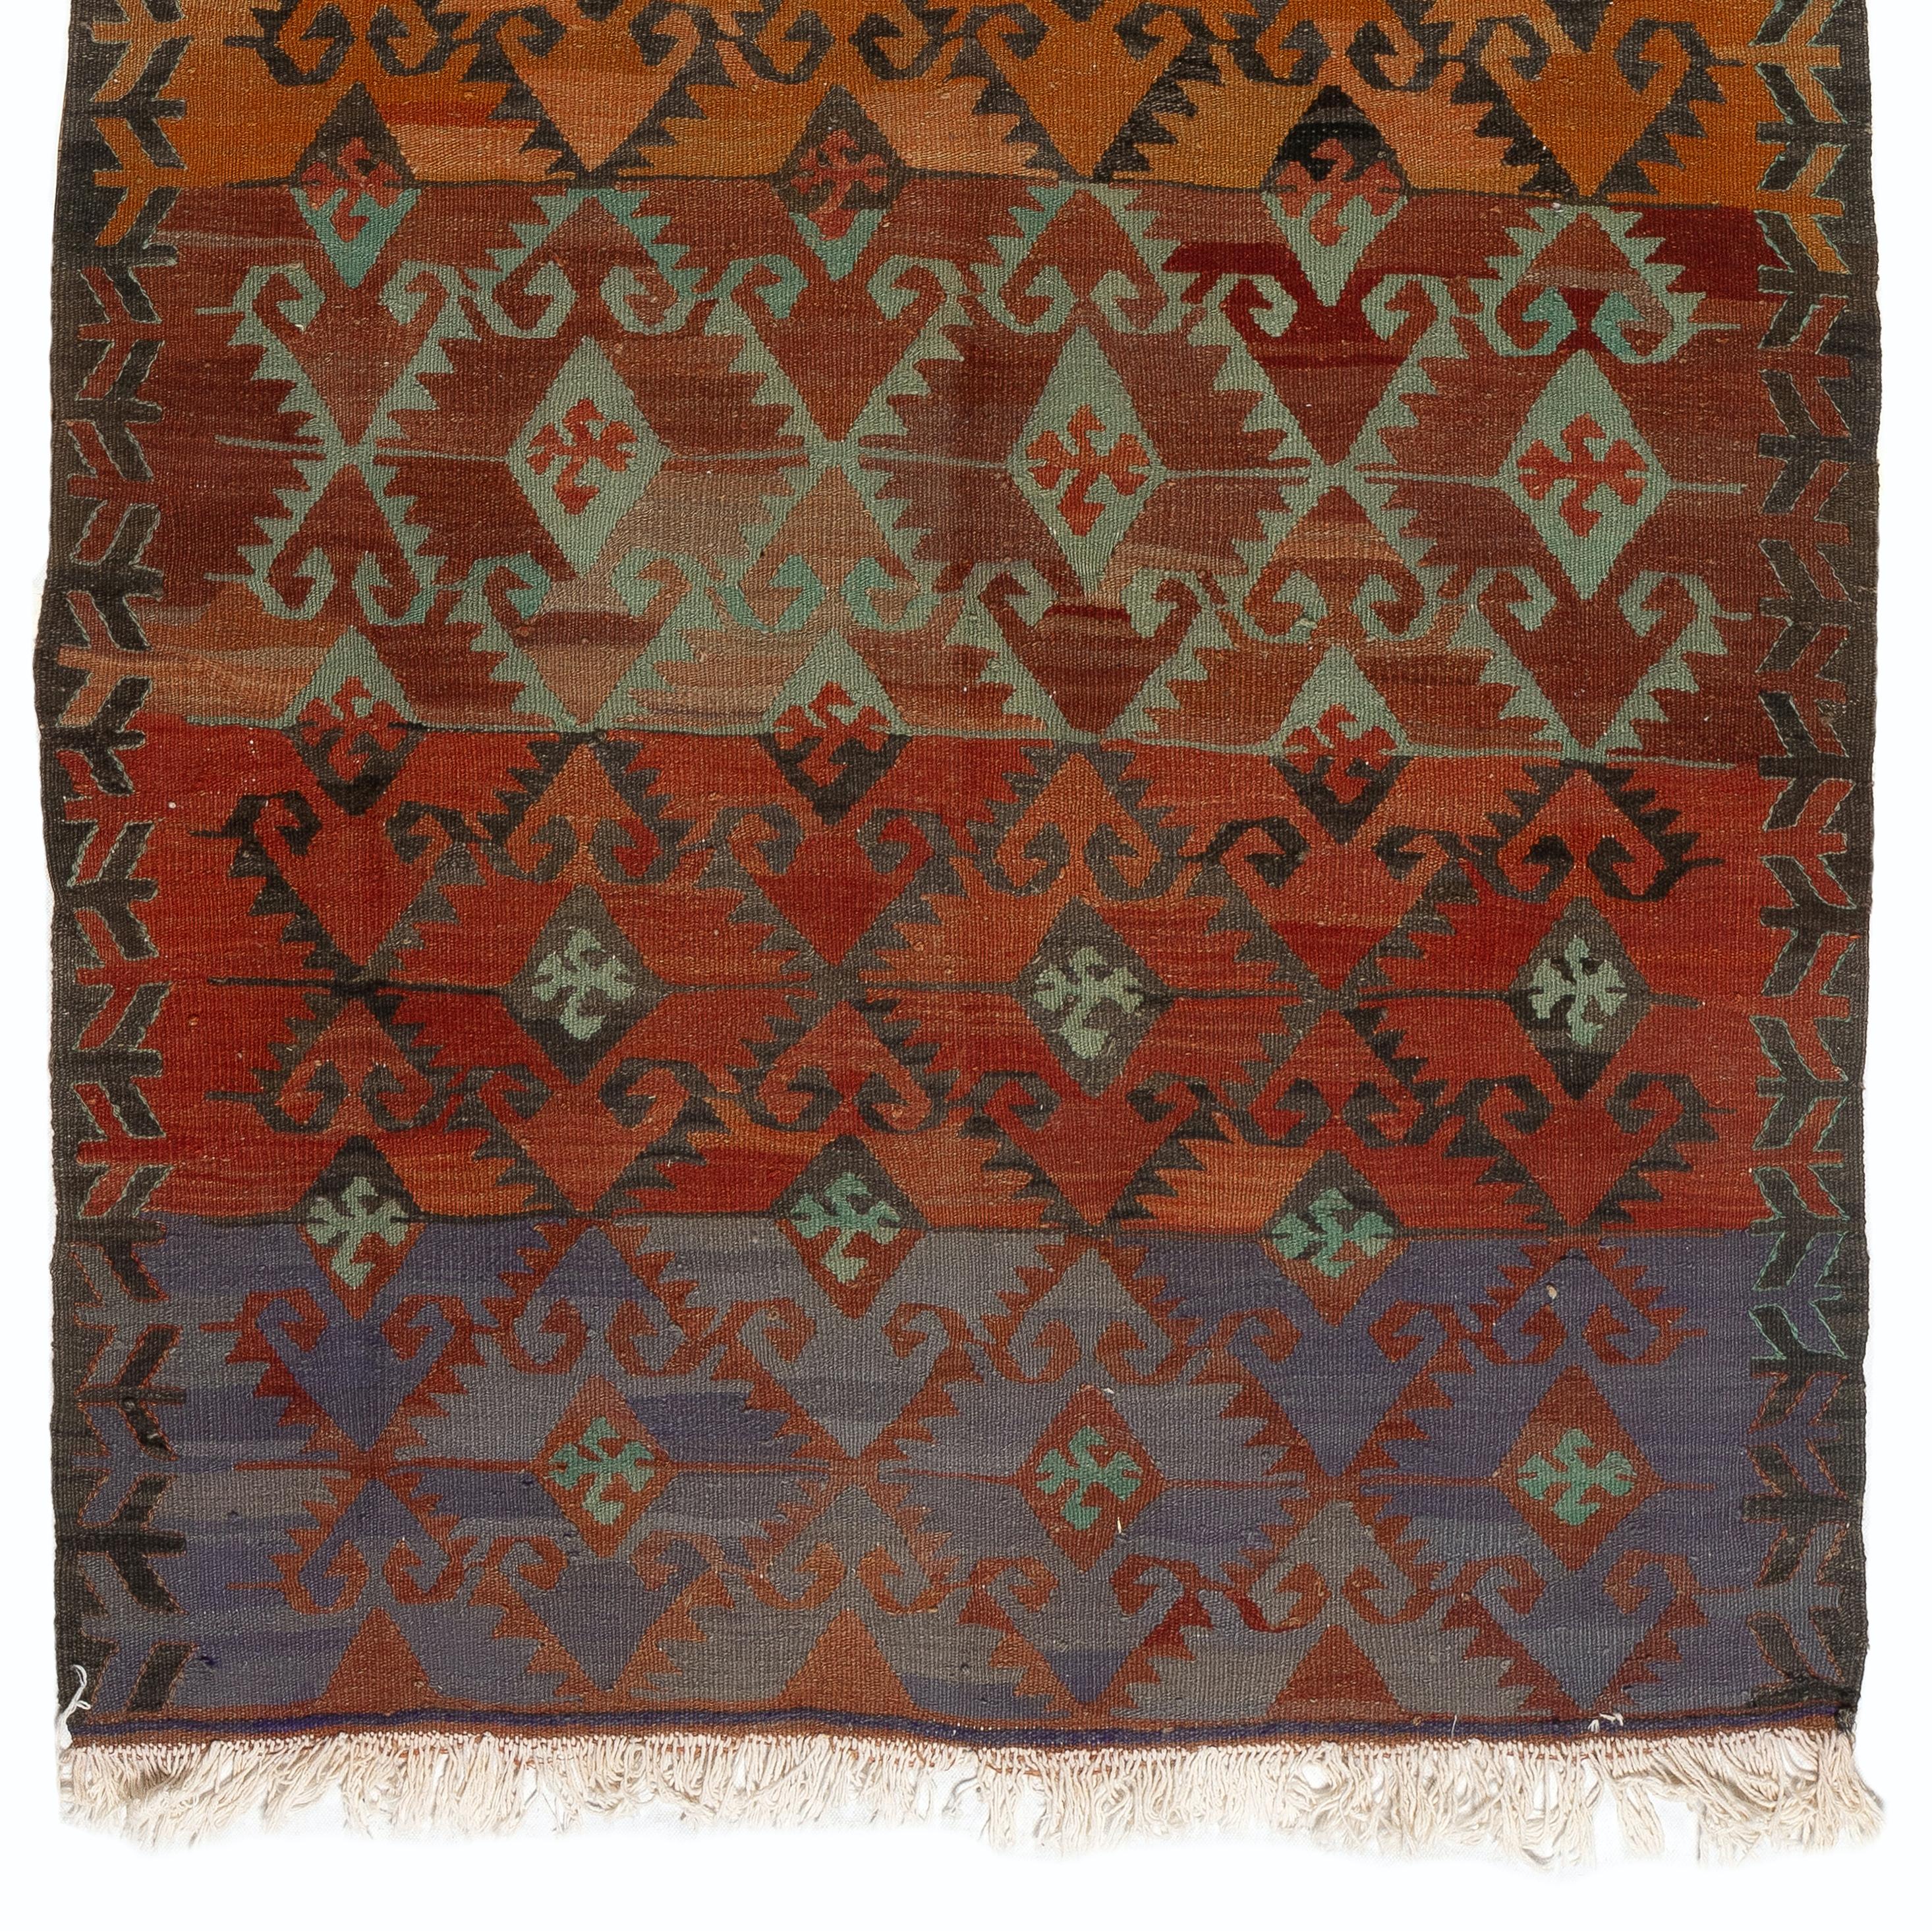 Vintage handwoven flat-weave (kilim) with geometric design, all wool.
Ideal for both residencial and commercial interiors. 
We can supply a suitable rug-pad if requested for extra cushioning and protection from wear and tear. Measures: 3.6 x 7.3